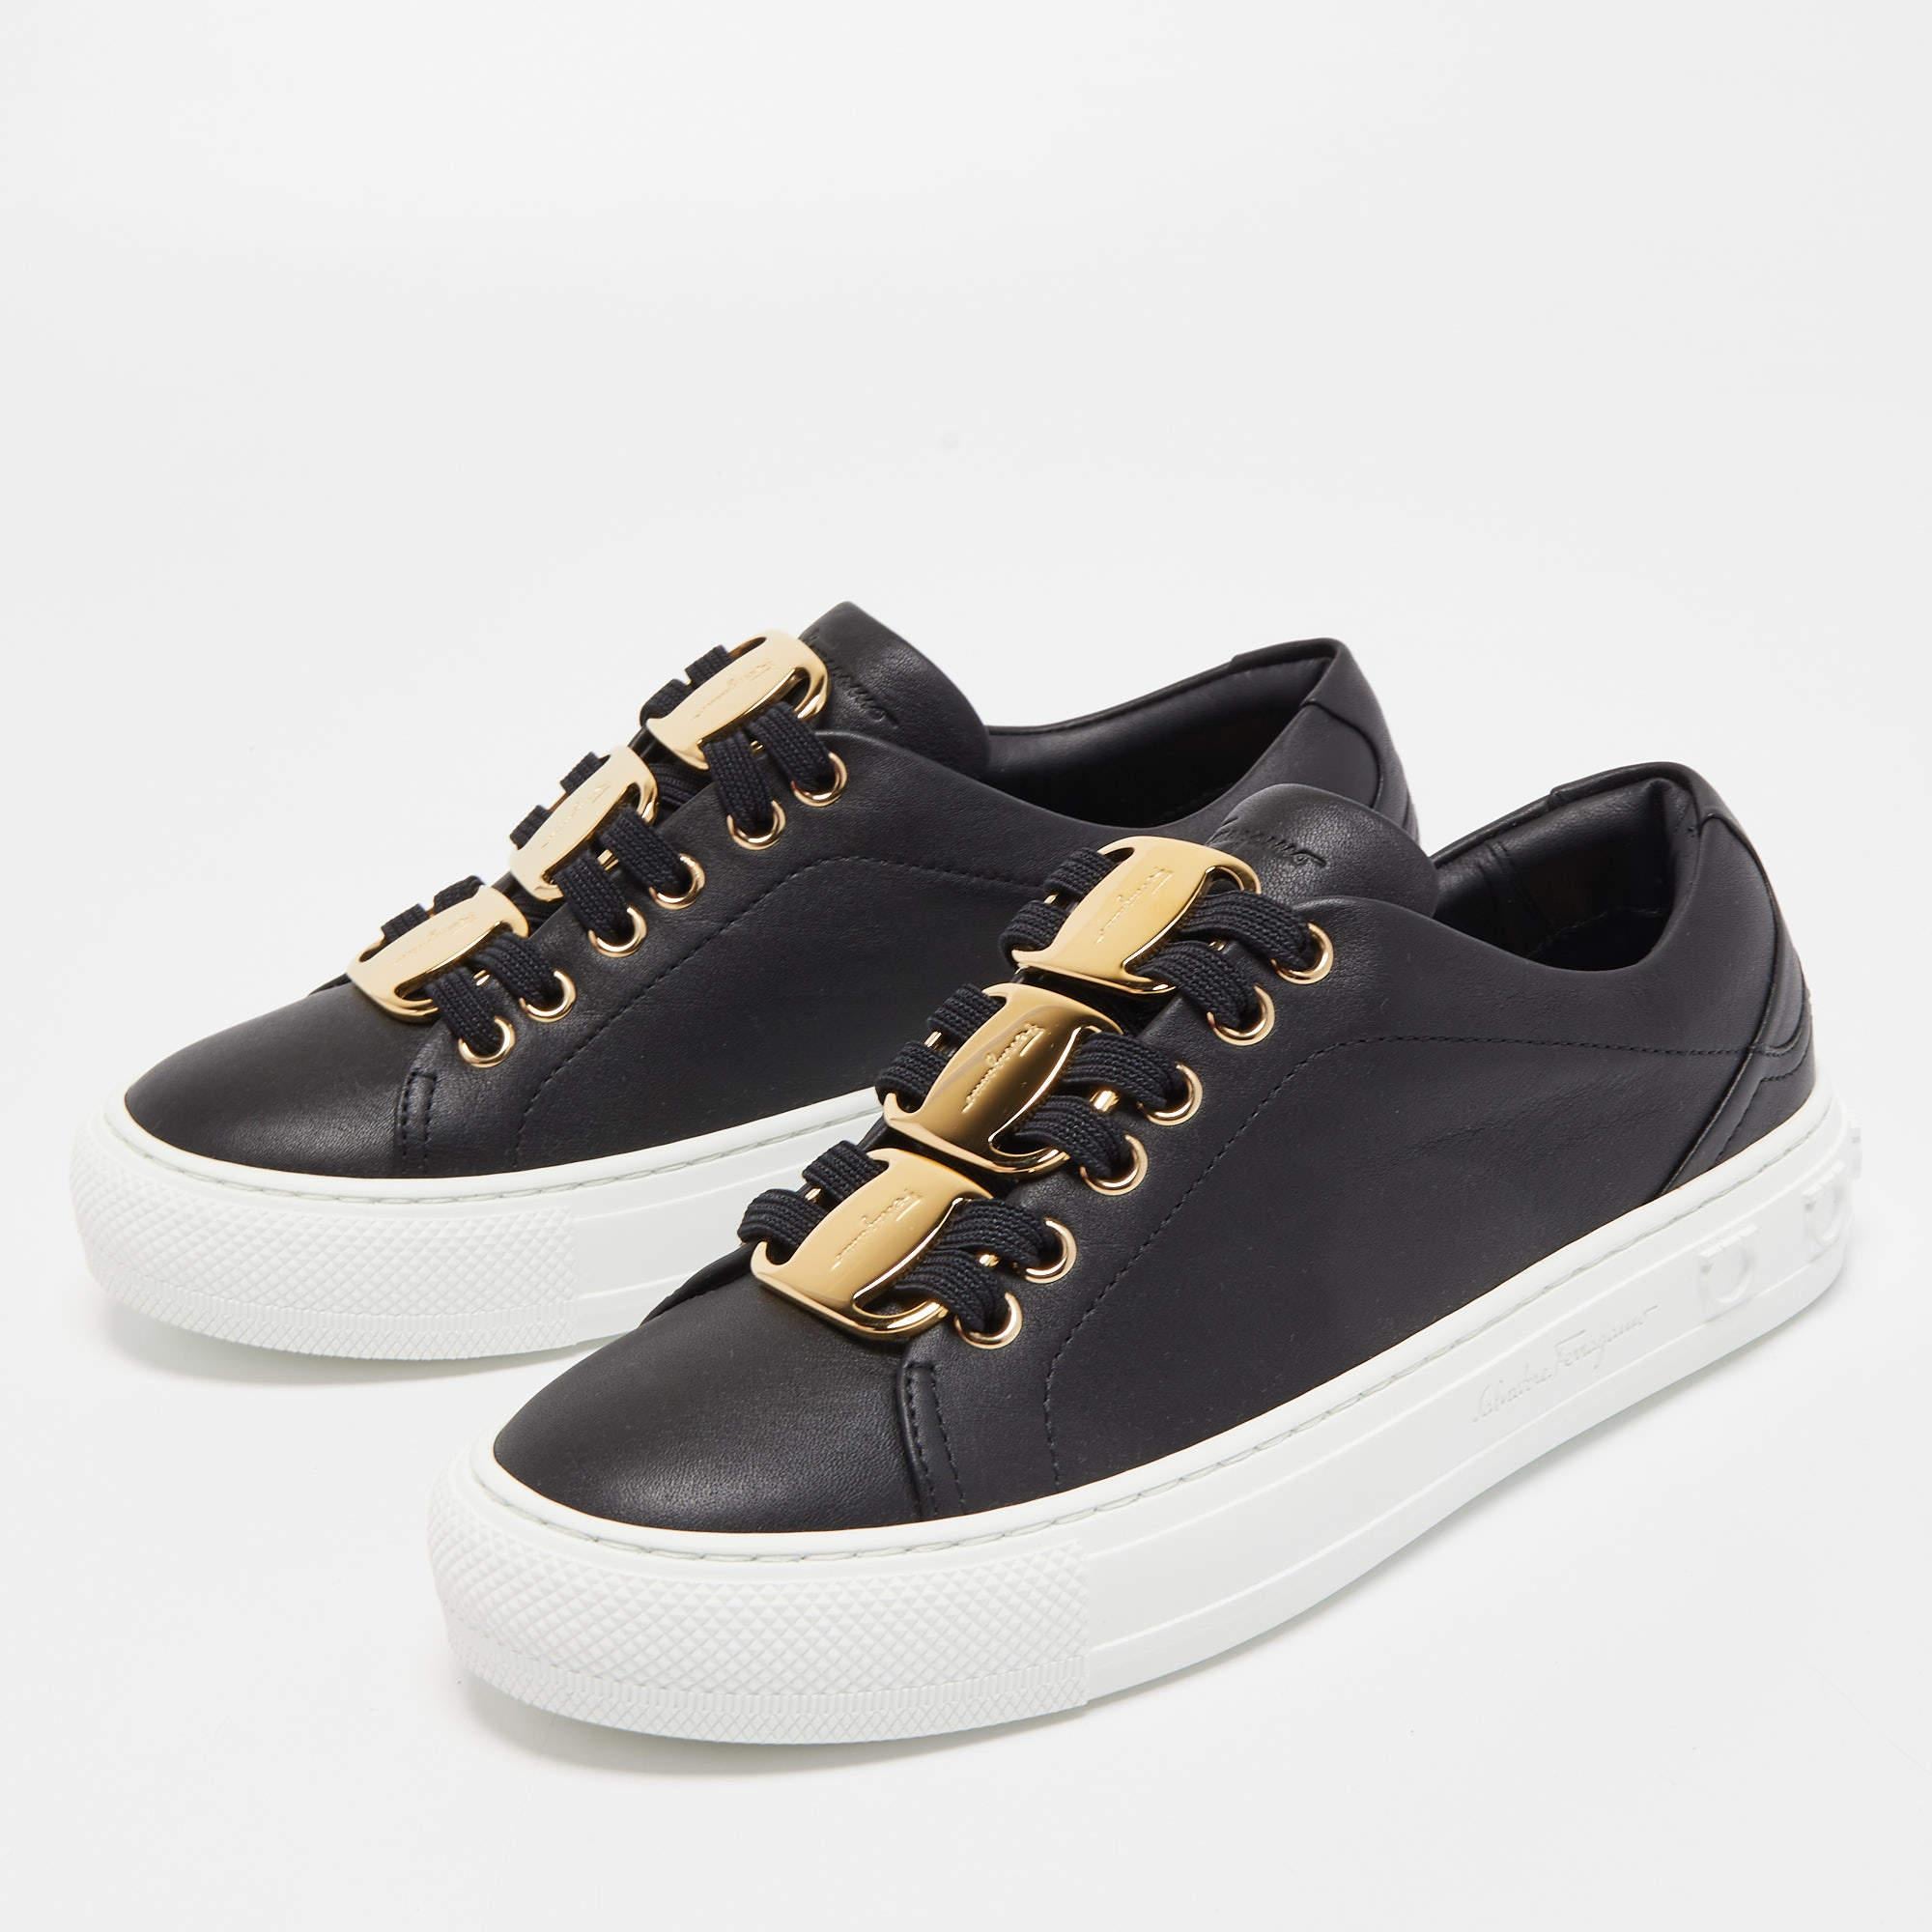 Packed with style and comfort, these Salvatore Ferragamo sneakers are gentle on the feet so that you can glide through the day. They have a sleek upper with lace closure, and they're set on durable rubber soles.

Includes
Original Dustbag, Original